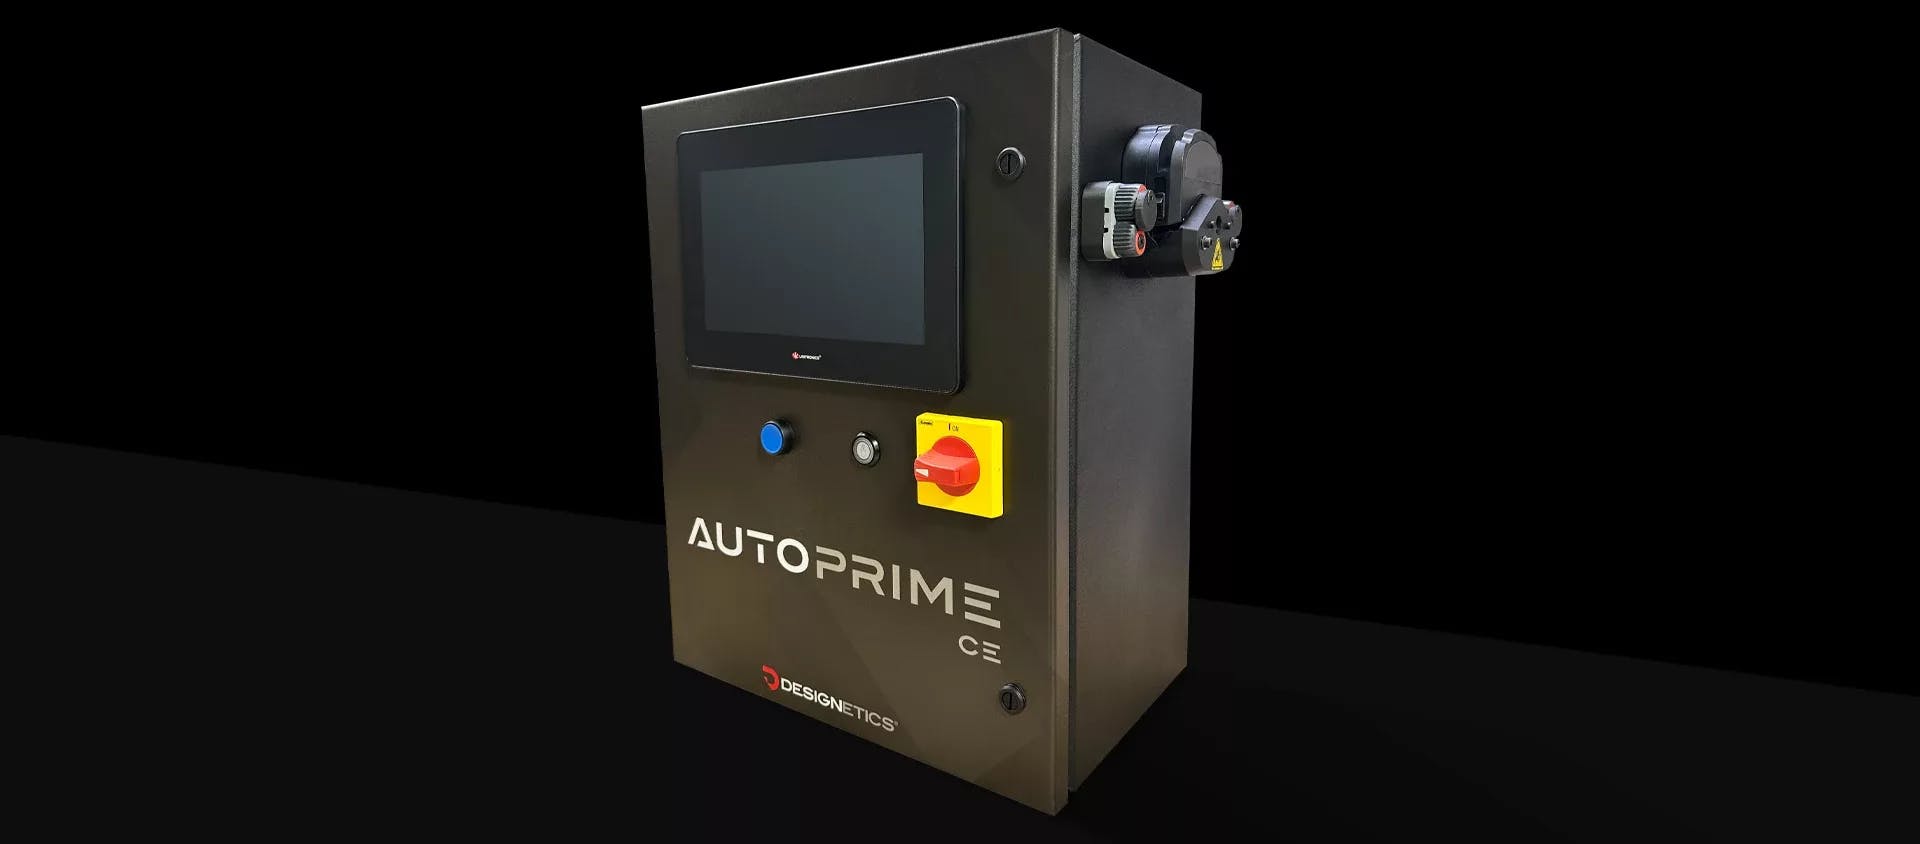 Dramatic view of the Autoprime CE system.